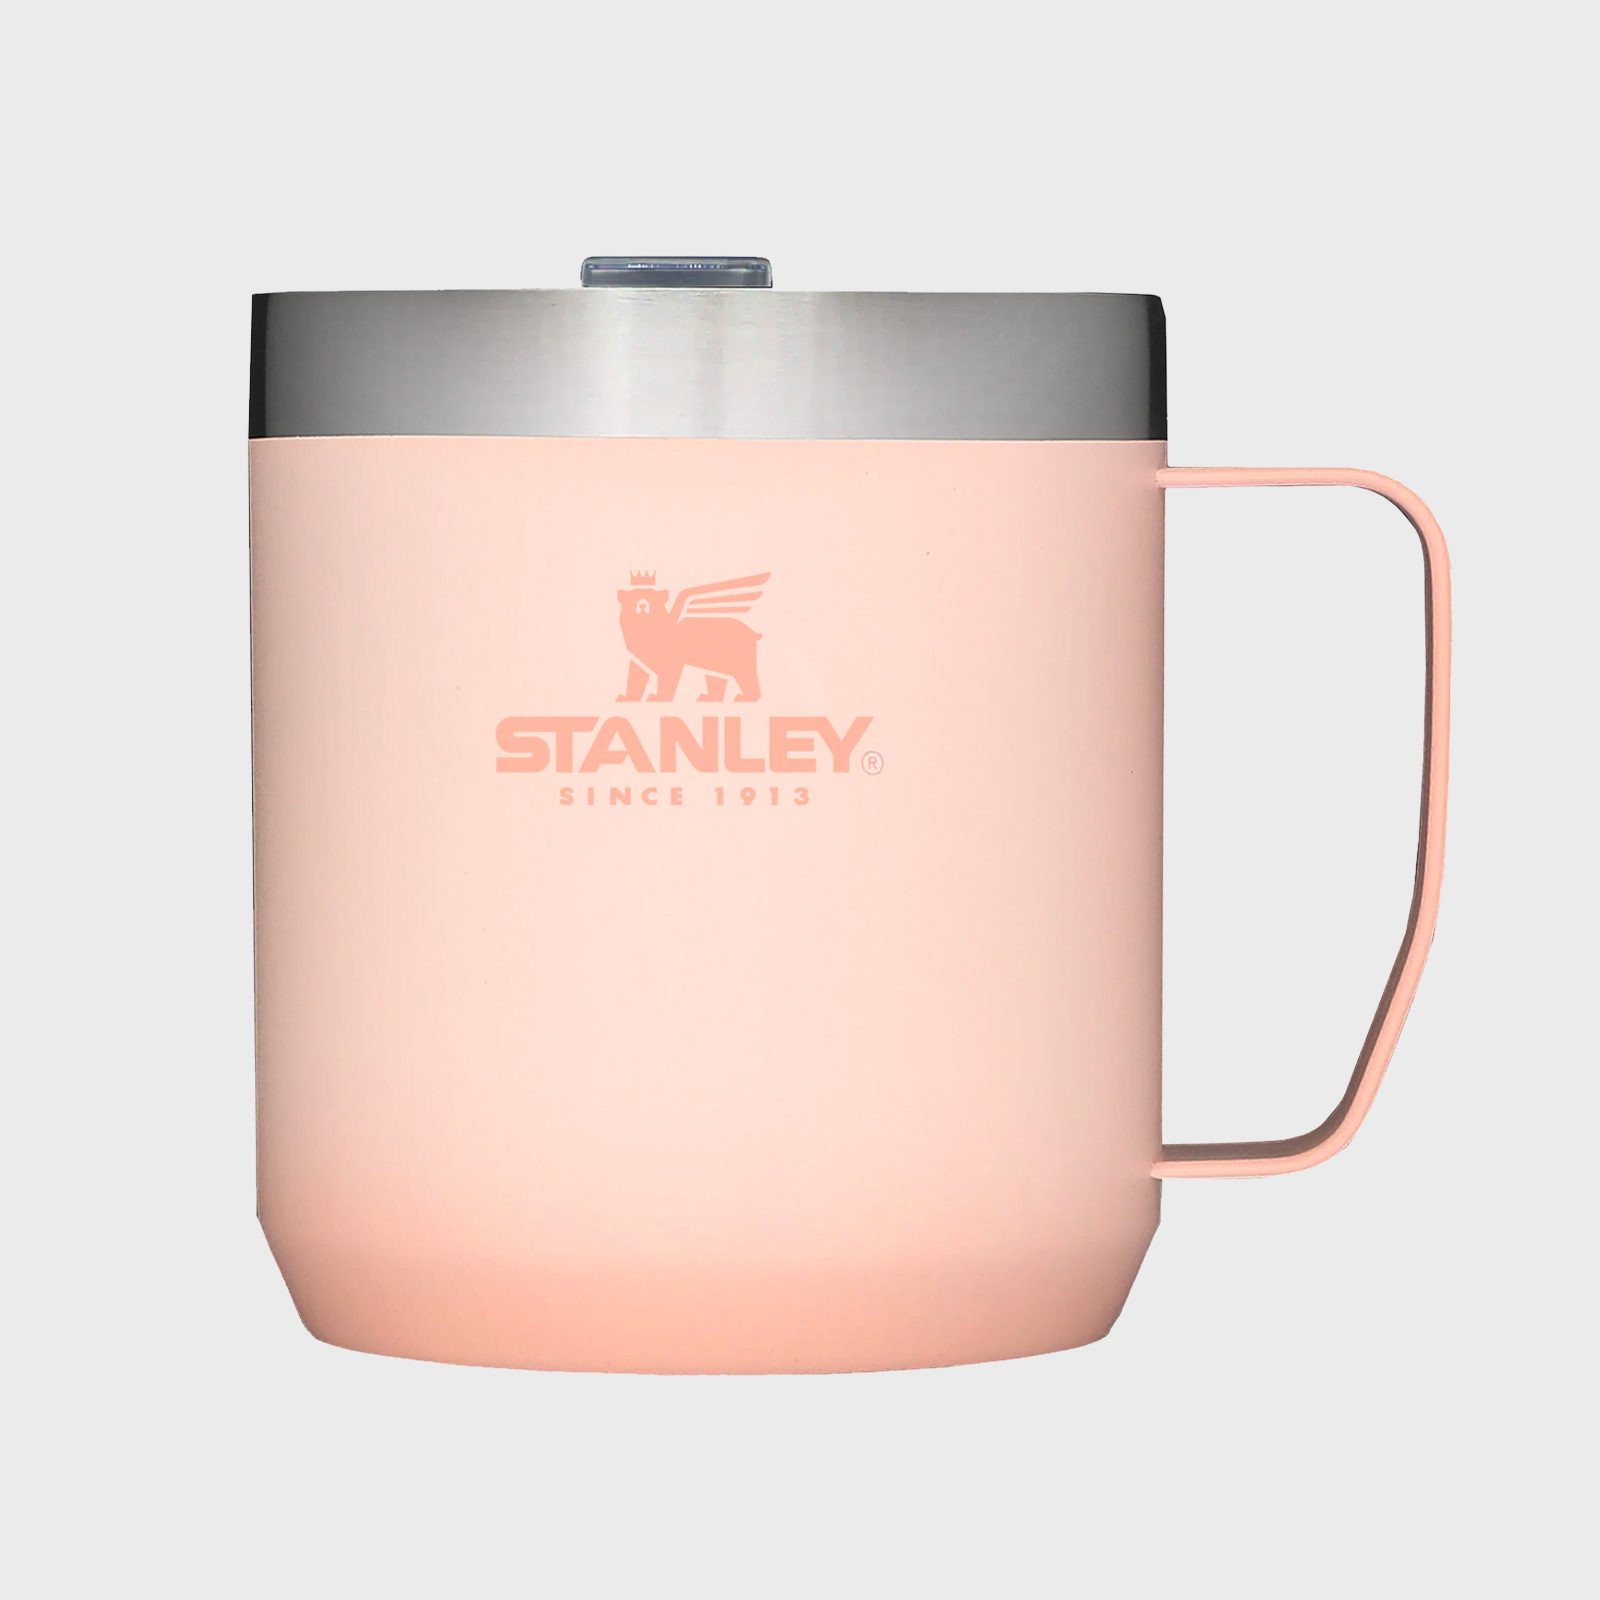 Stanley Adventure eCycle Camp Mug - Cups and Mugs